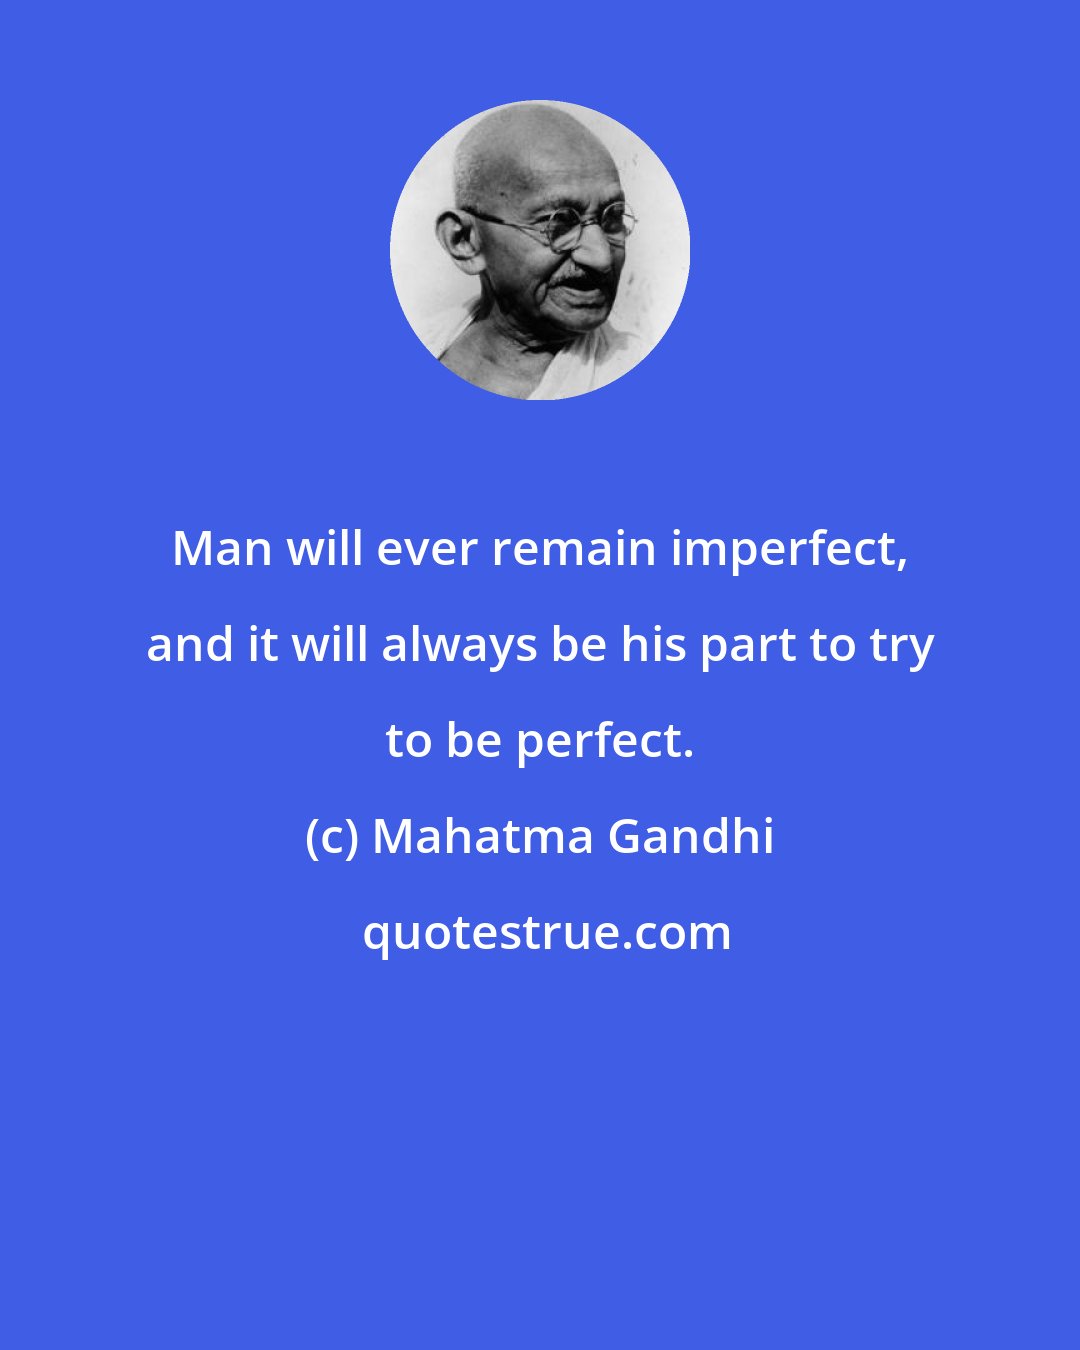 Mahatma Gandhi: Man will ever remain imperfect, and it will always be his part to try to be perfect.